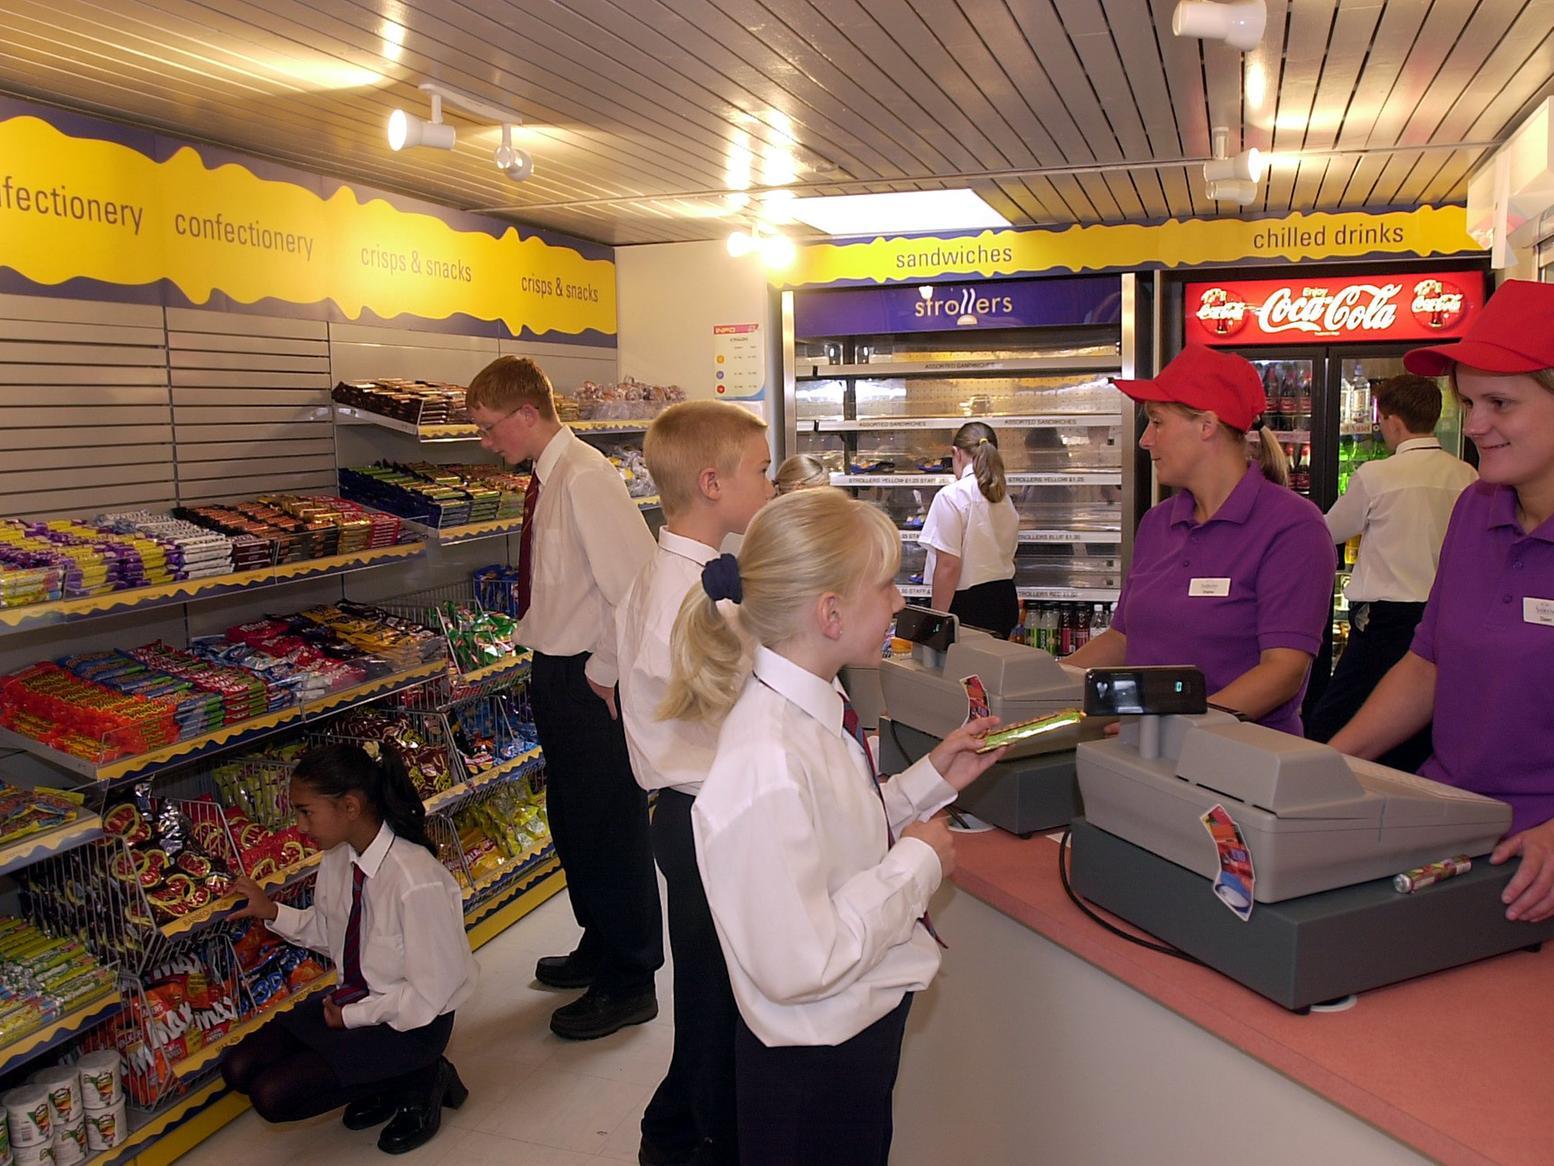 The shop at Garforth Community College